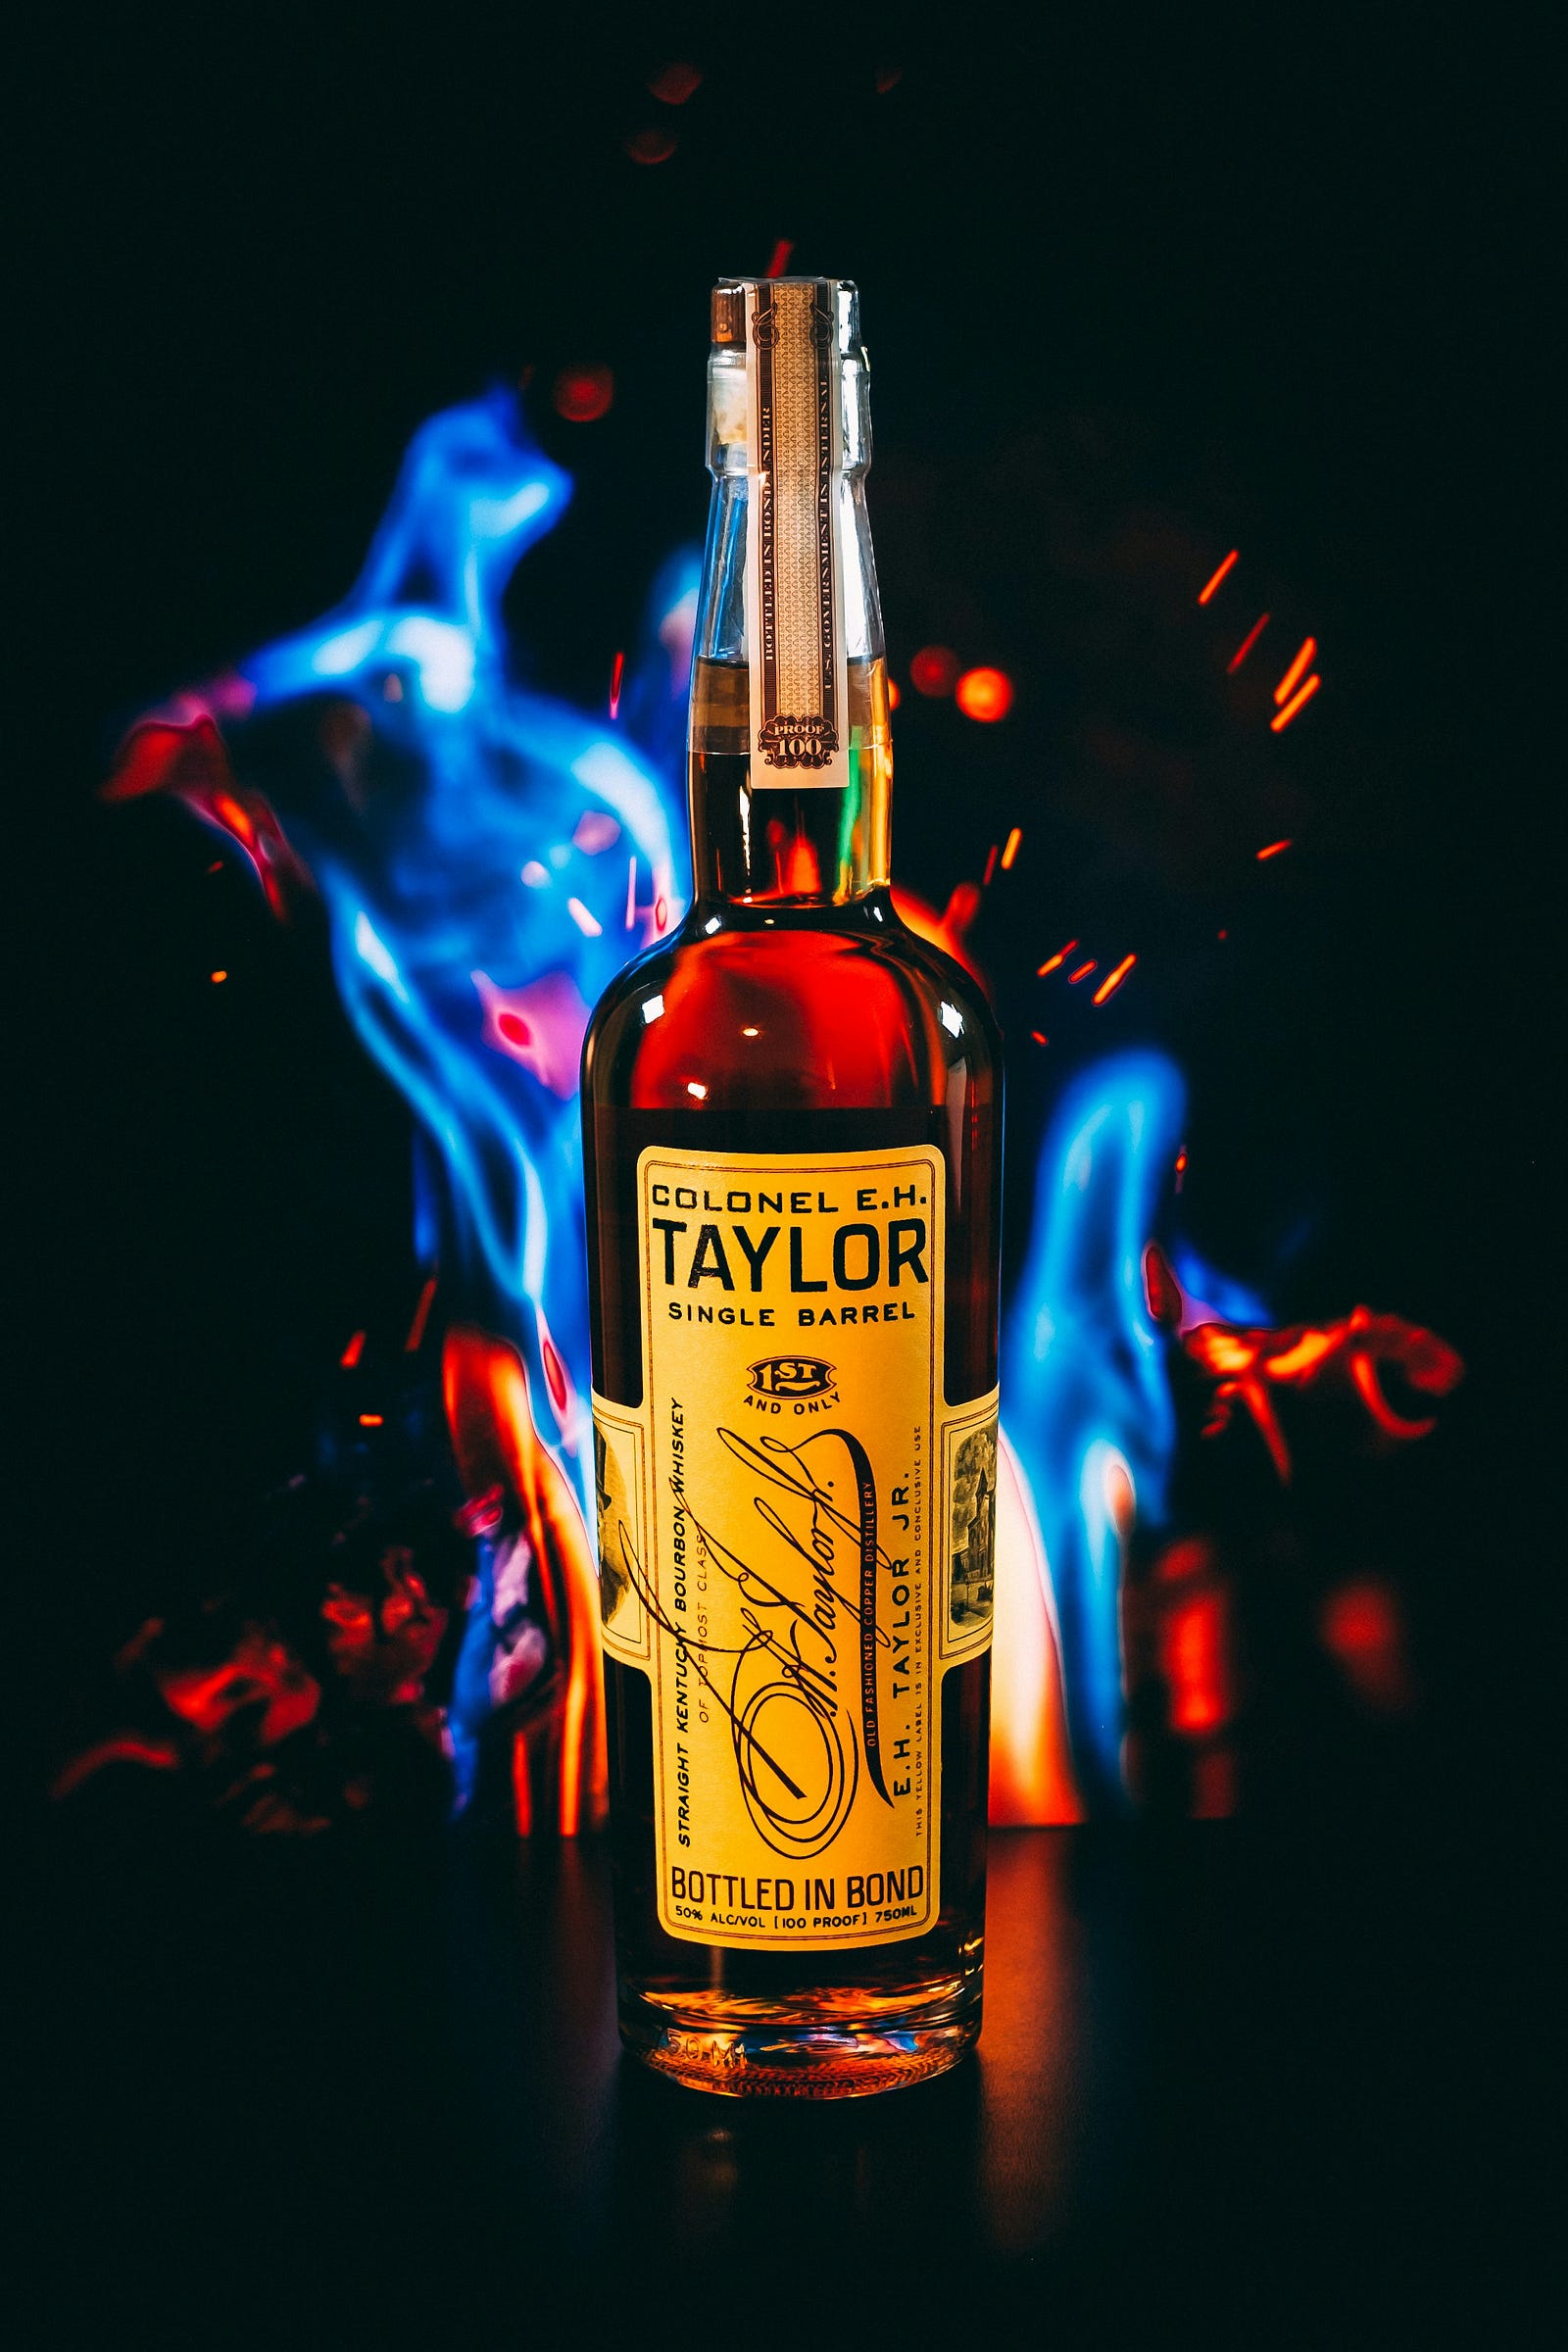 A bottle of Colonel E.H. Taylor whiskey, with blue flames behind it.